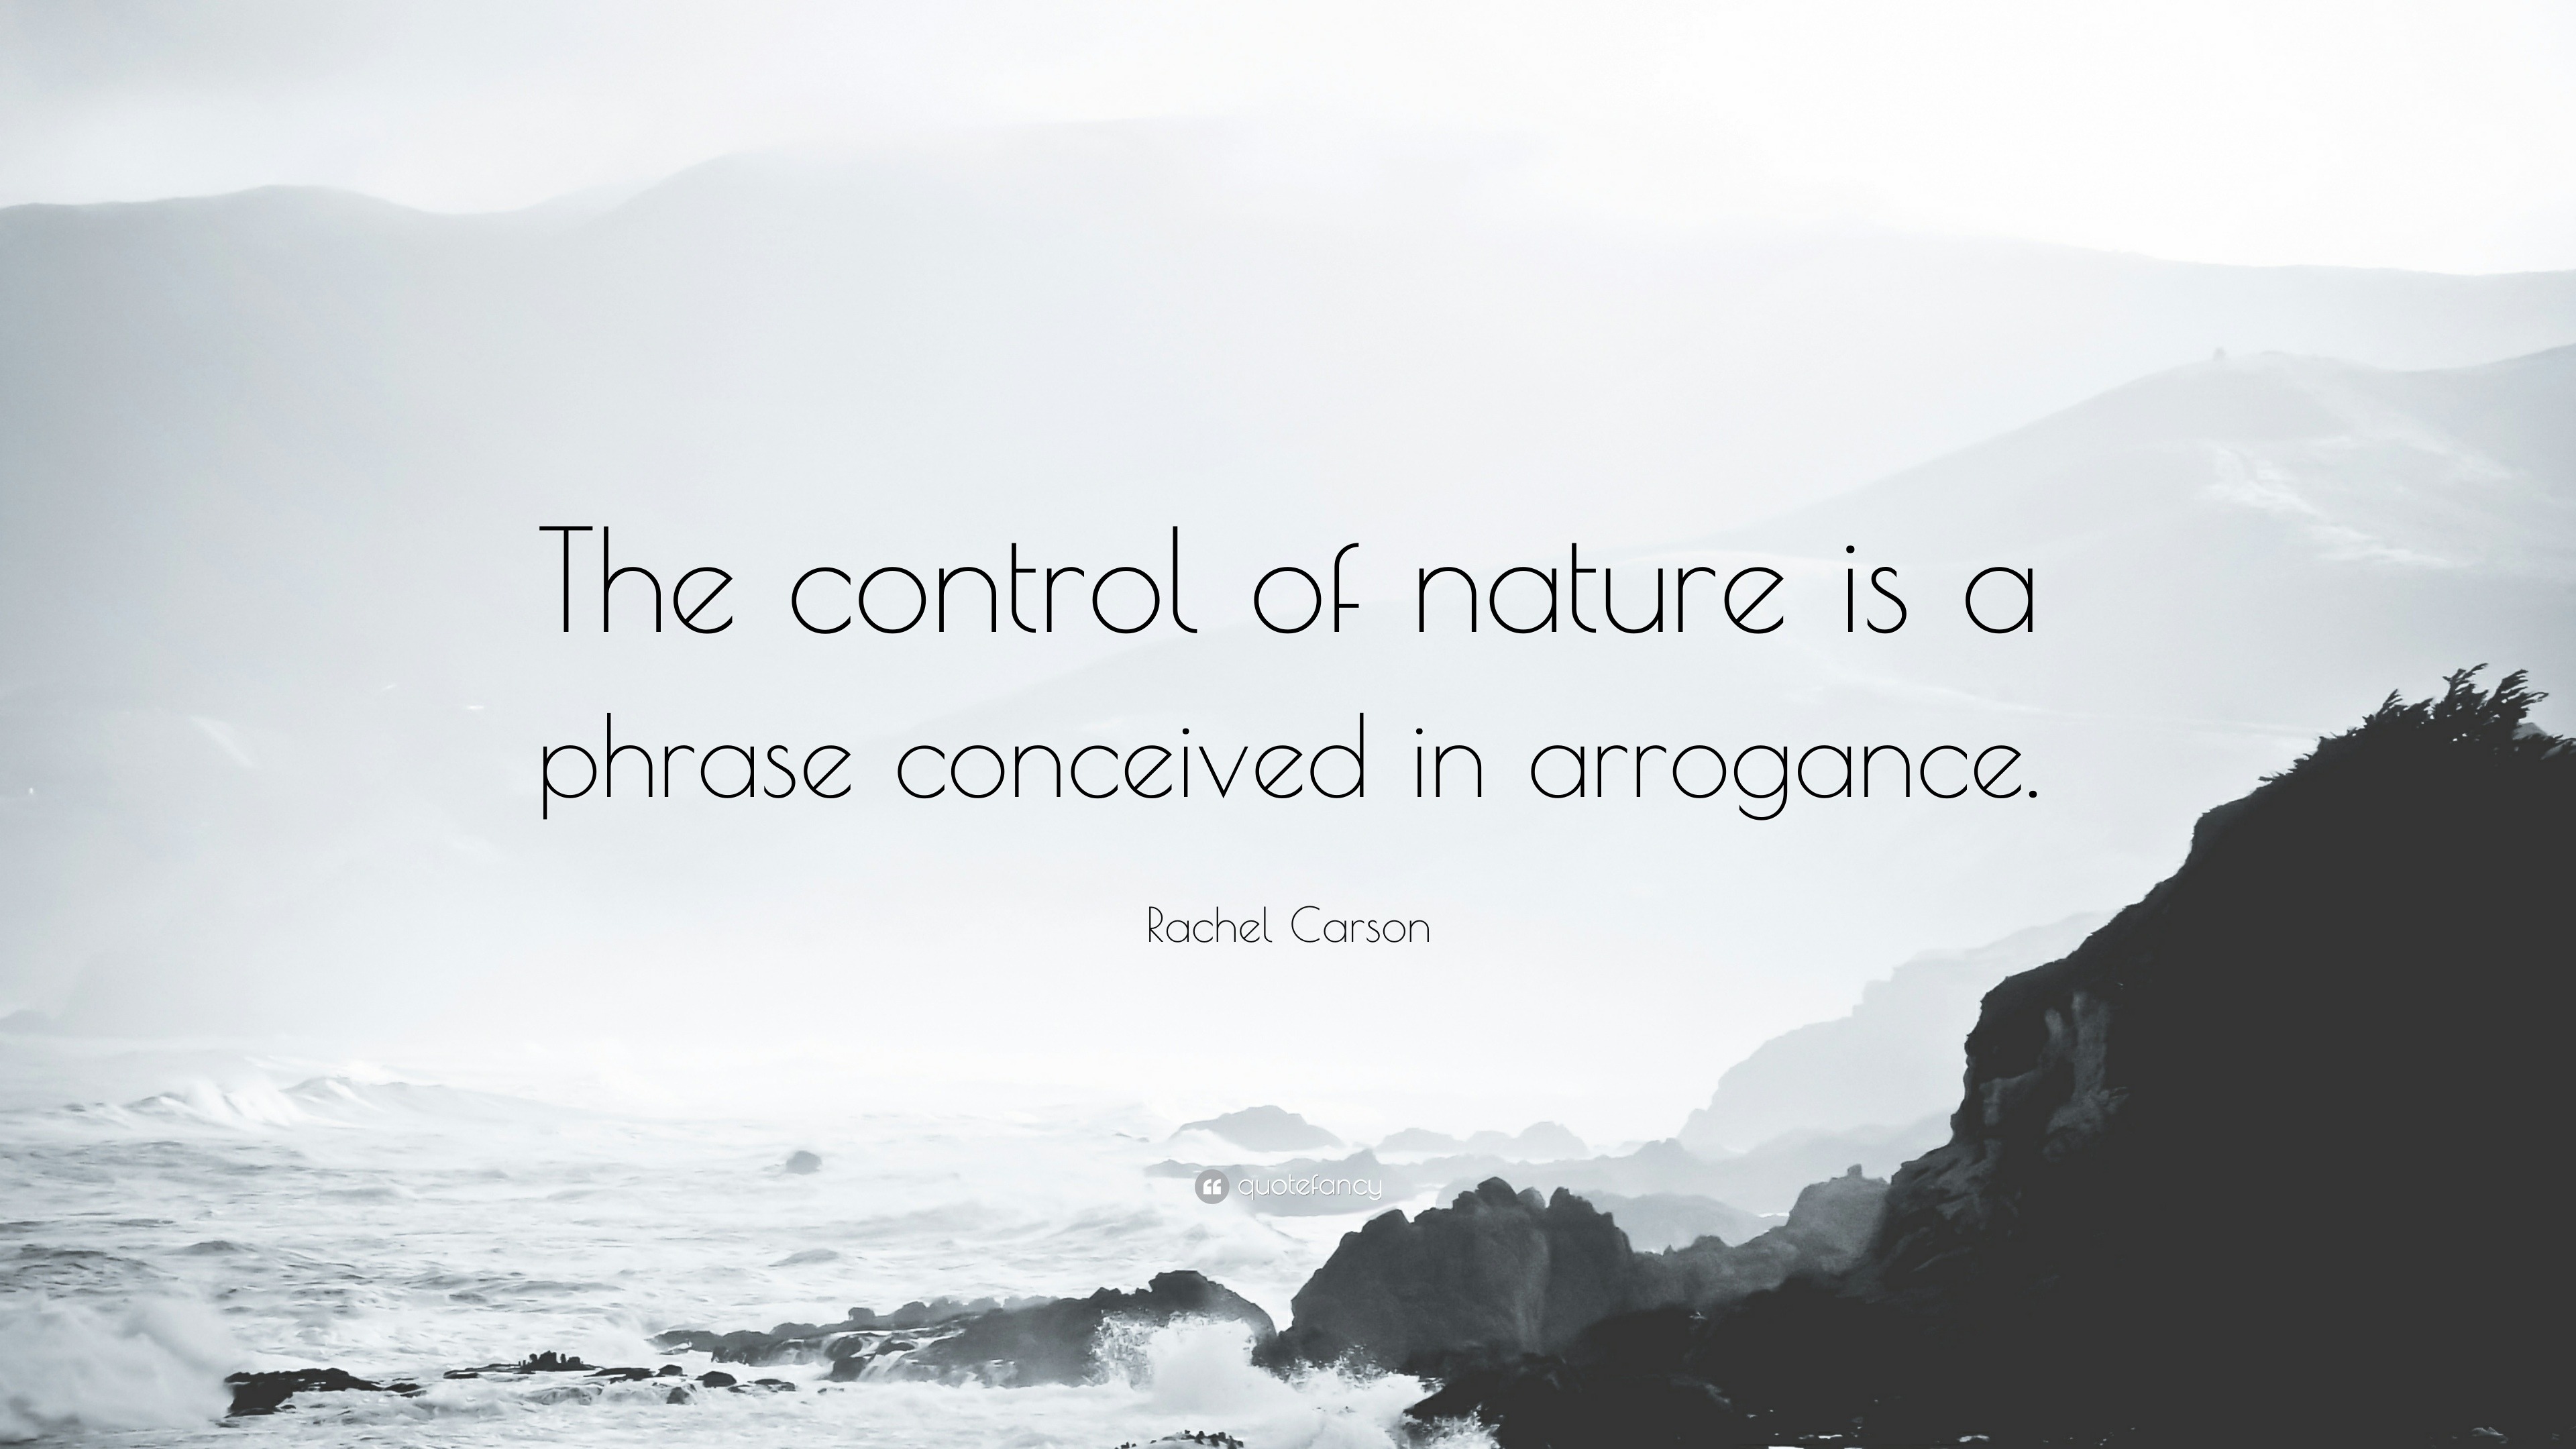 Rachel Carson “The control of nature is conceived arrogance.”